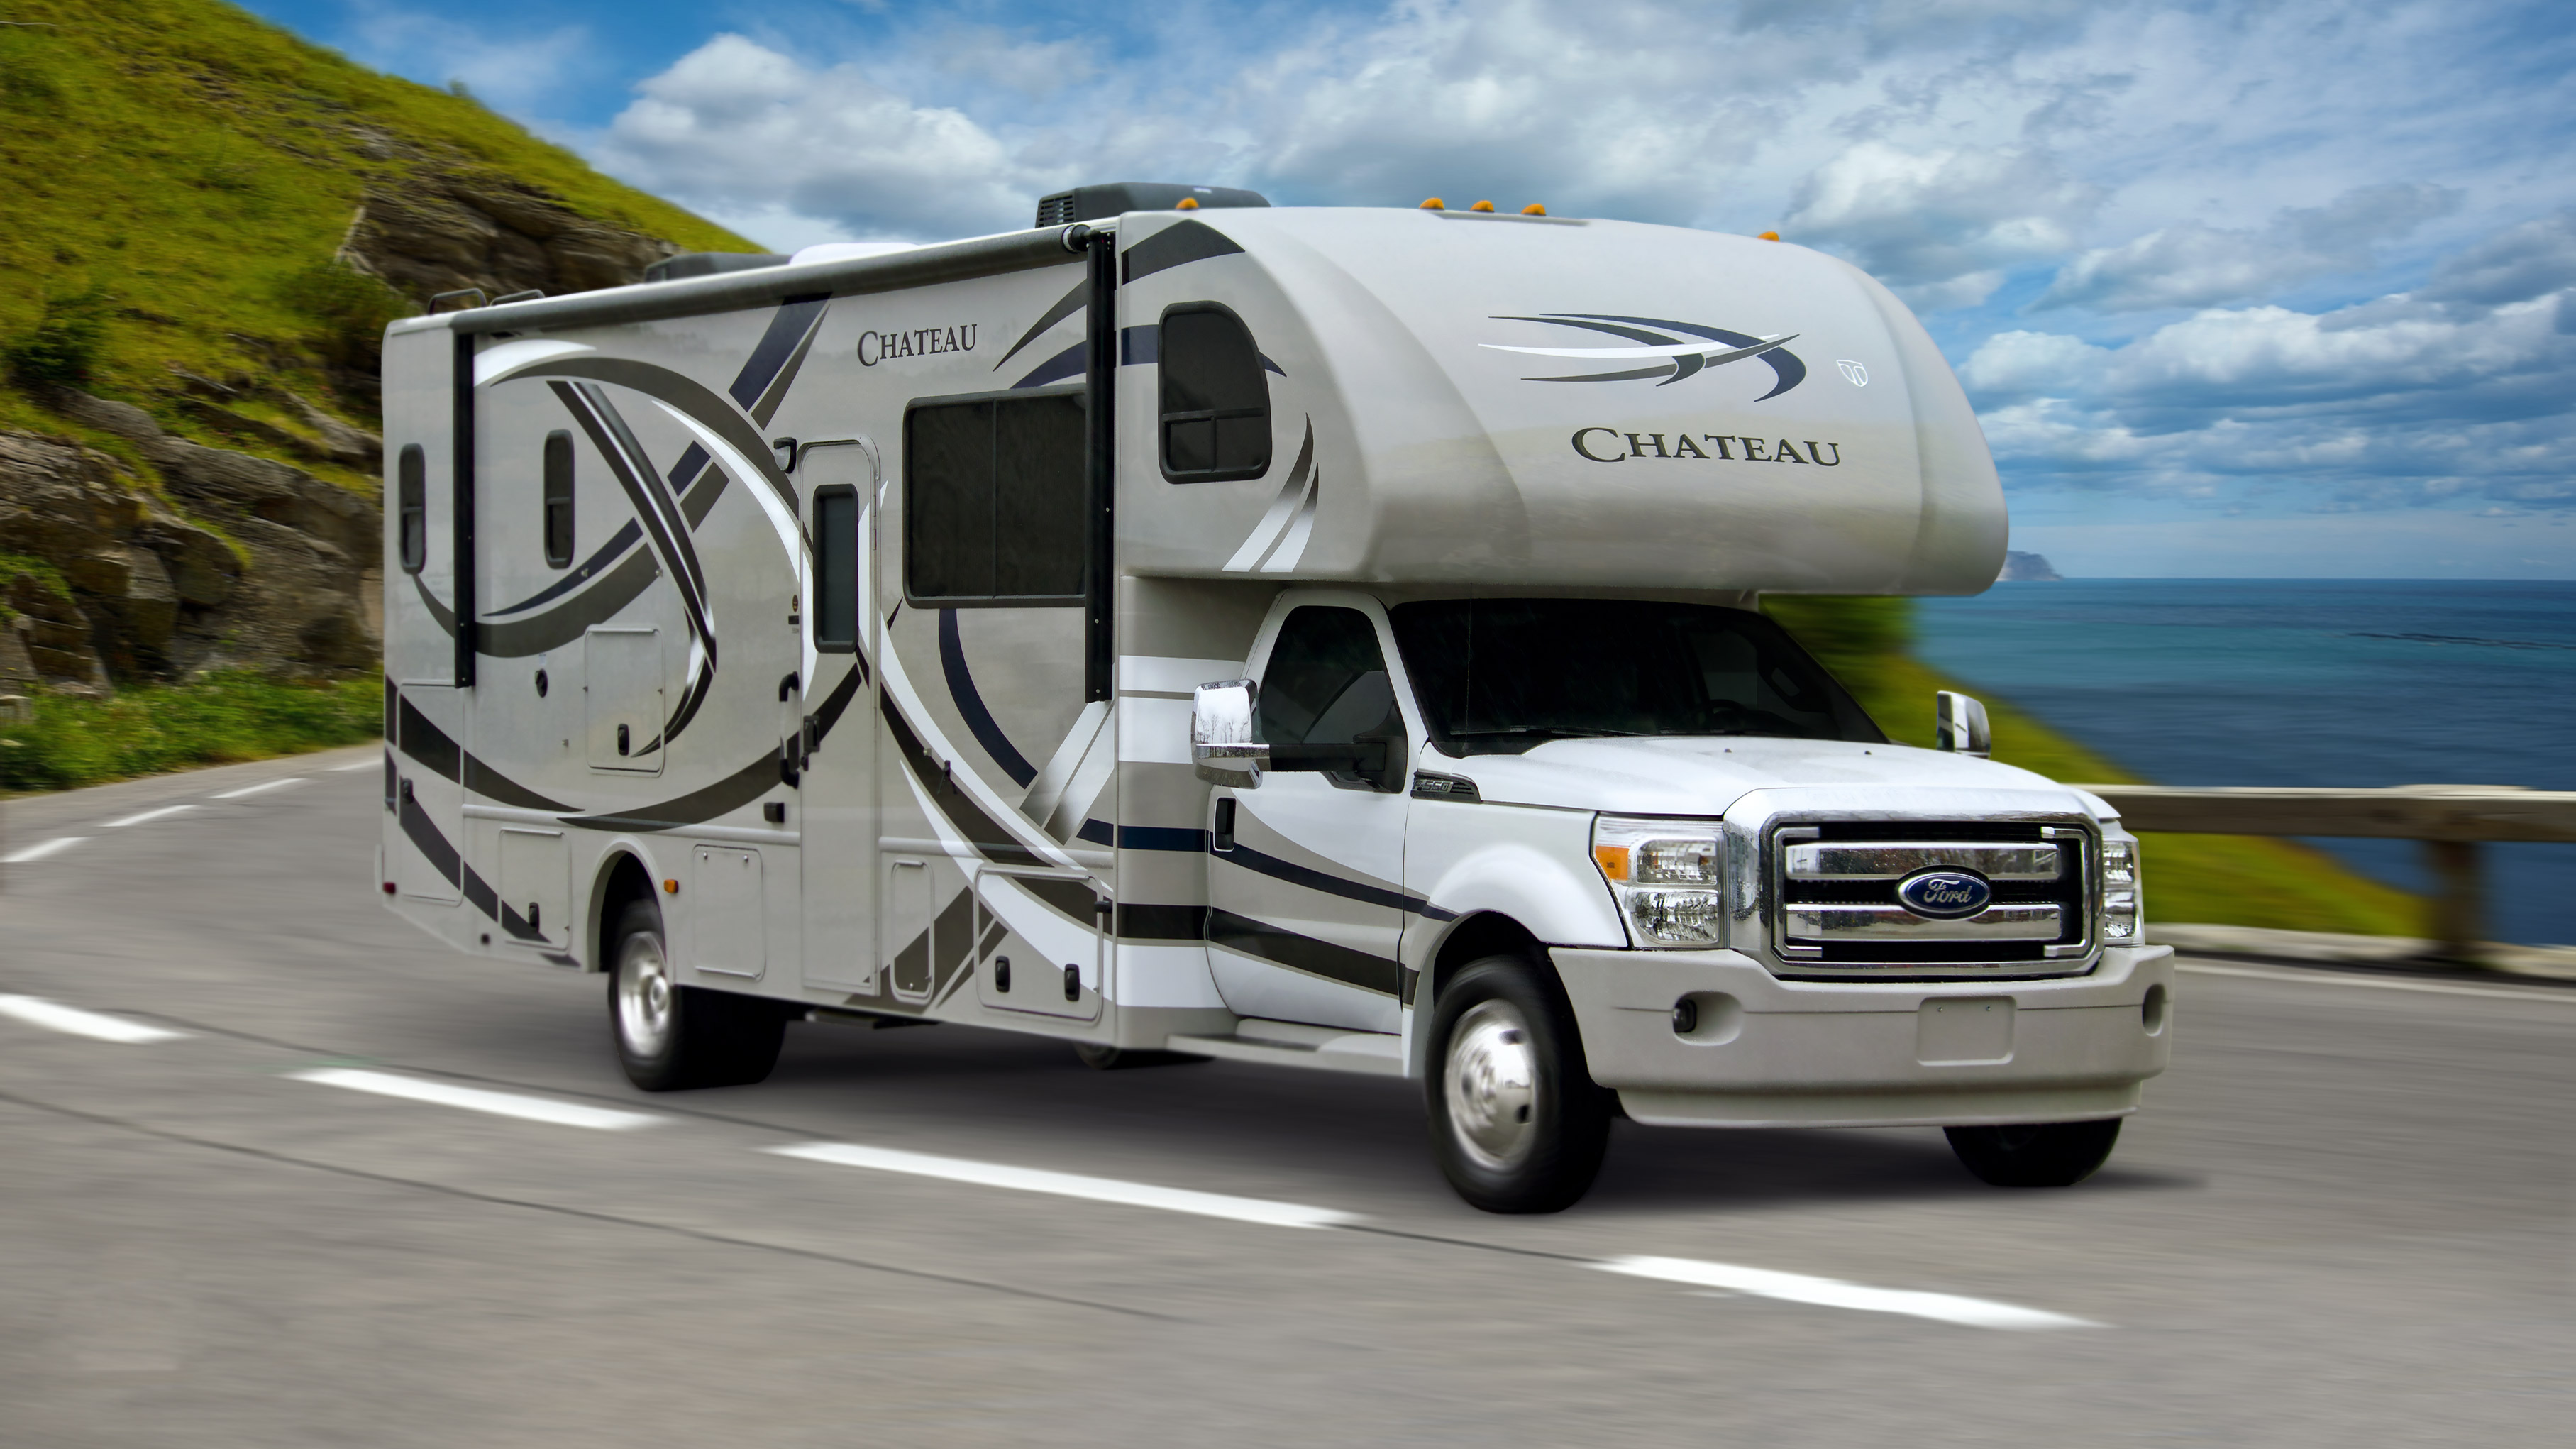 Key Features You want When You Buy An RV